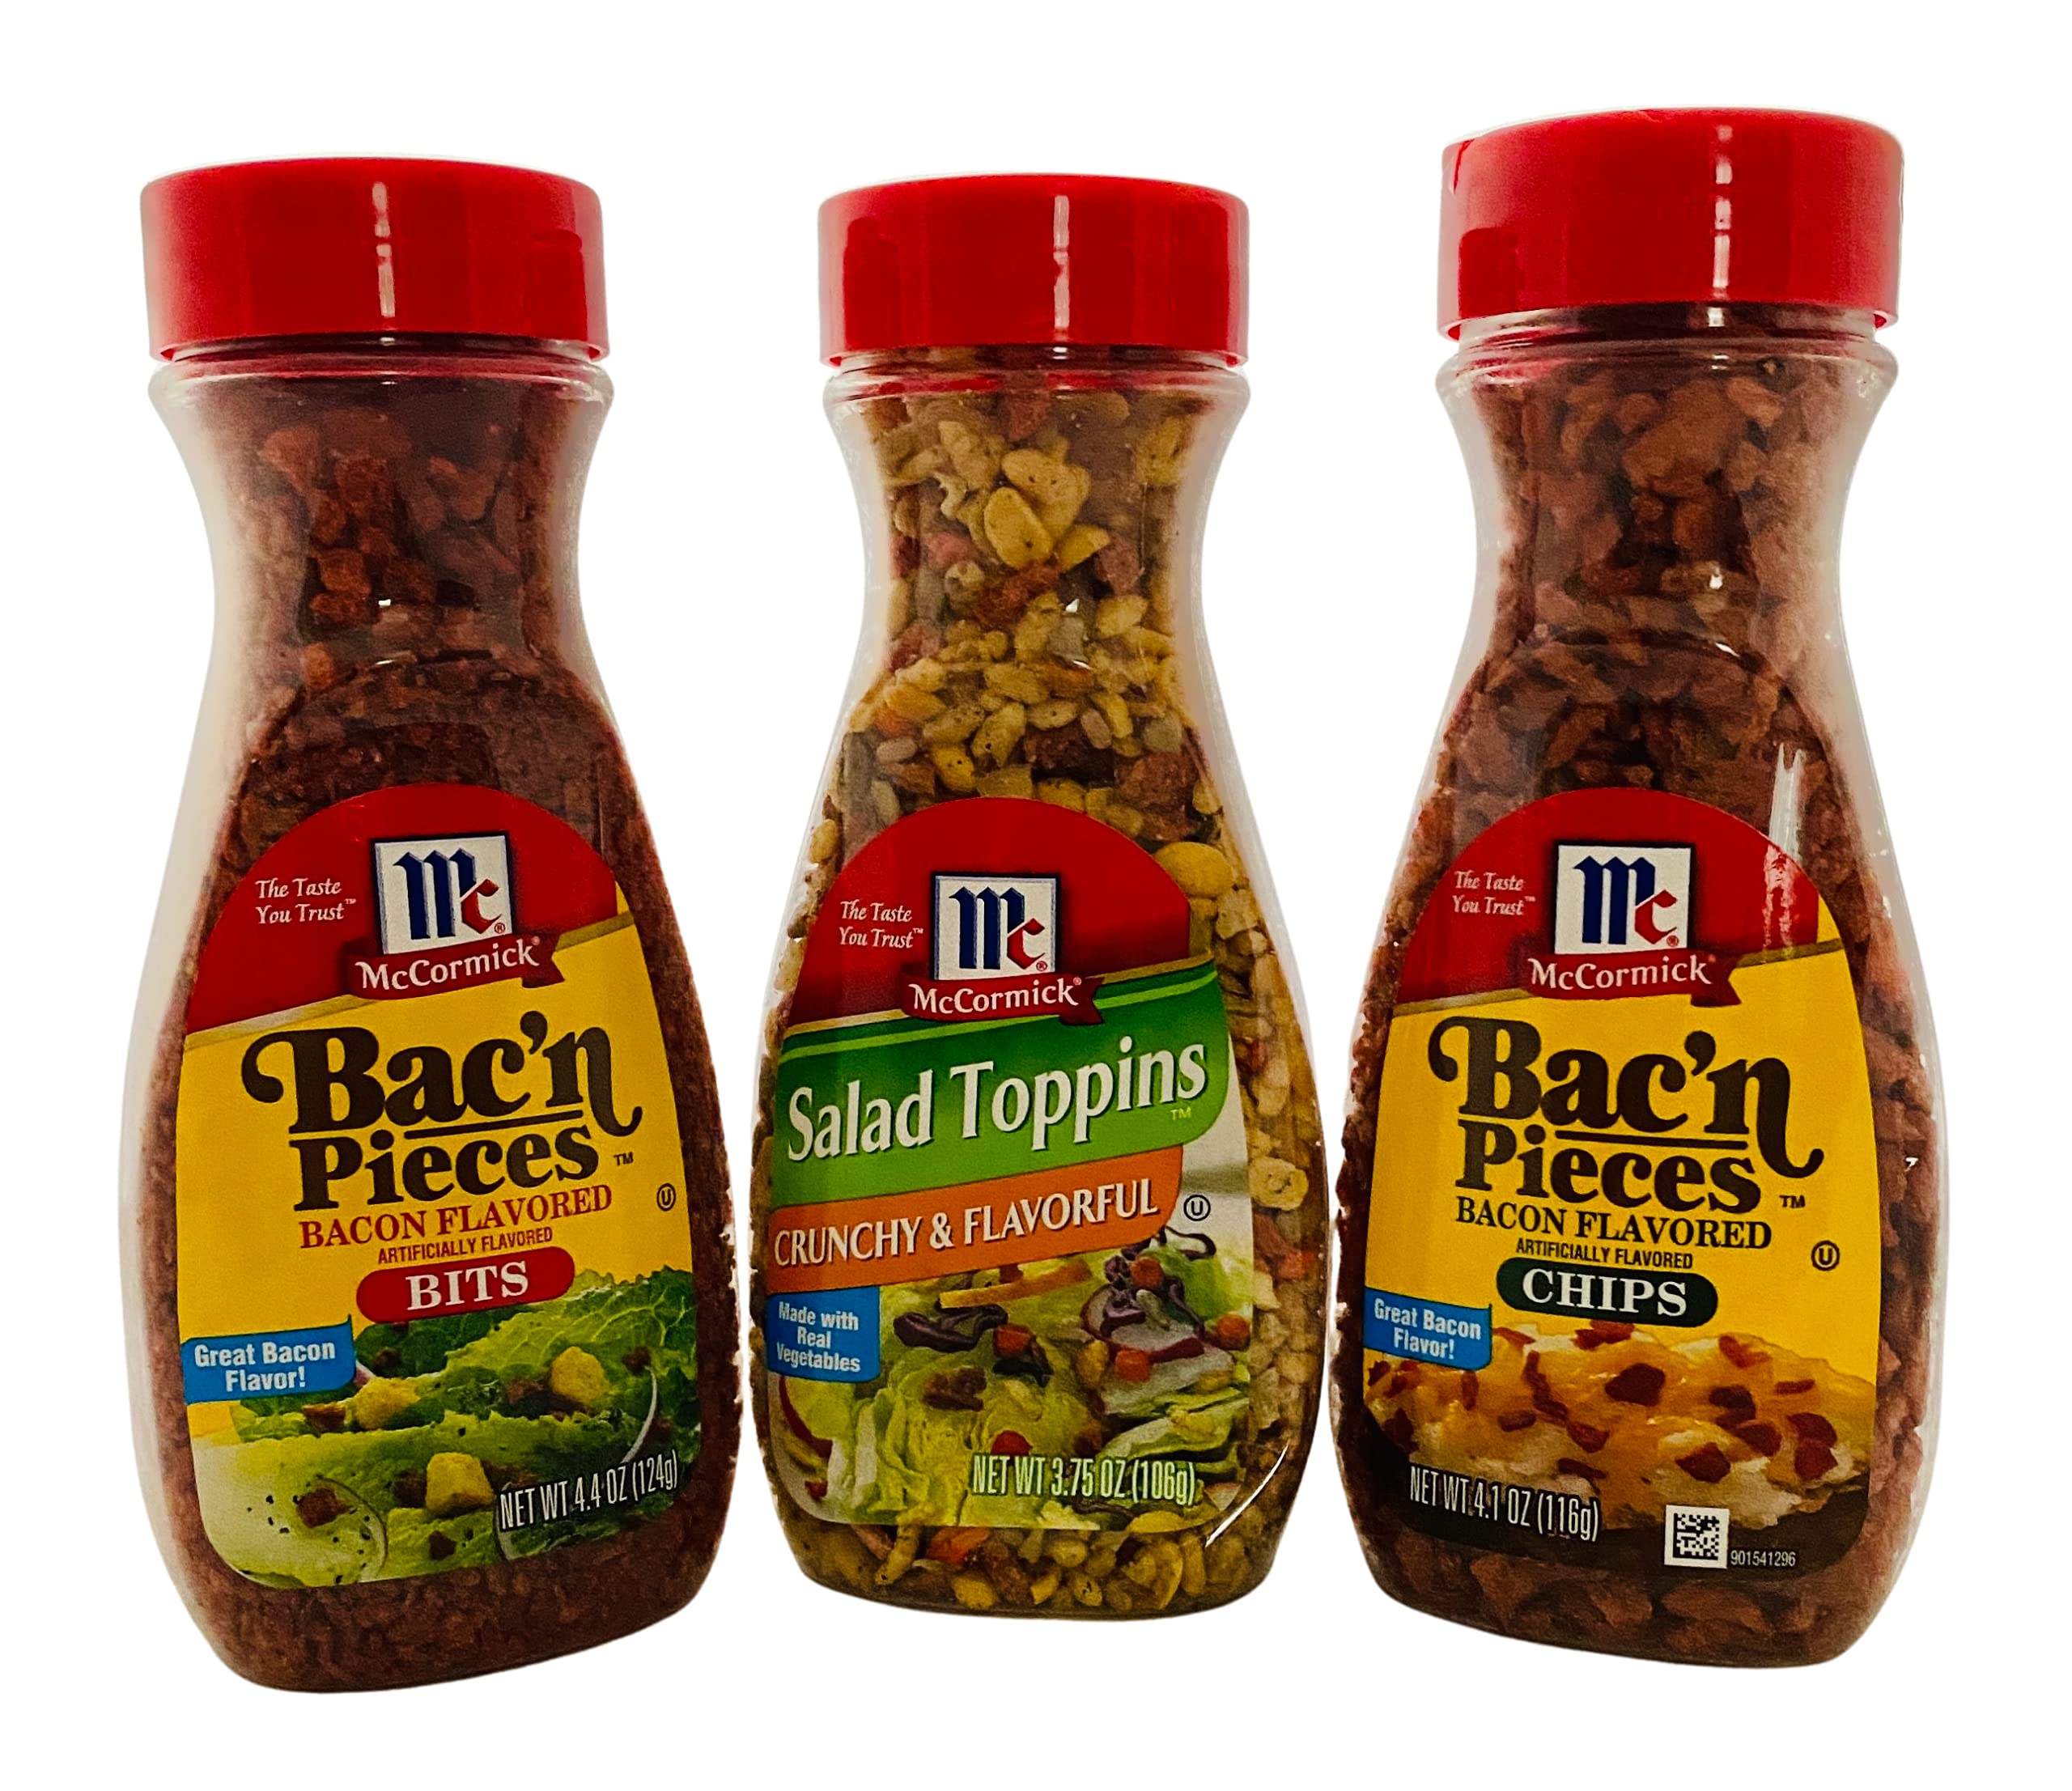 Mccormick, Salad Toppins, Crunchy & Flavorful, 3.75Oz Bottle (Pack Of 3)